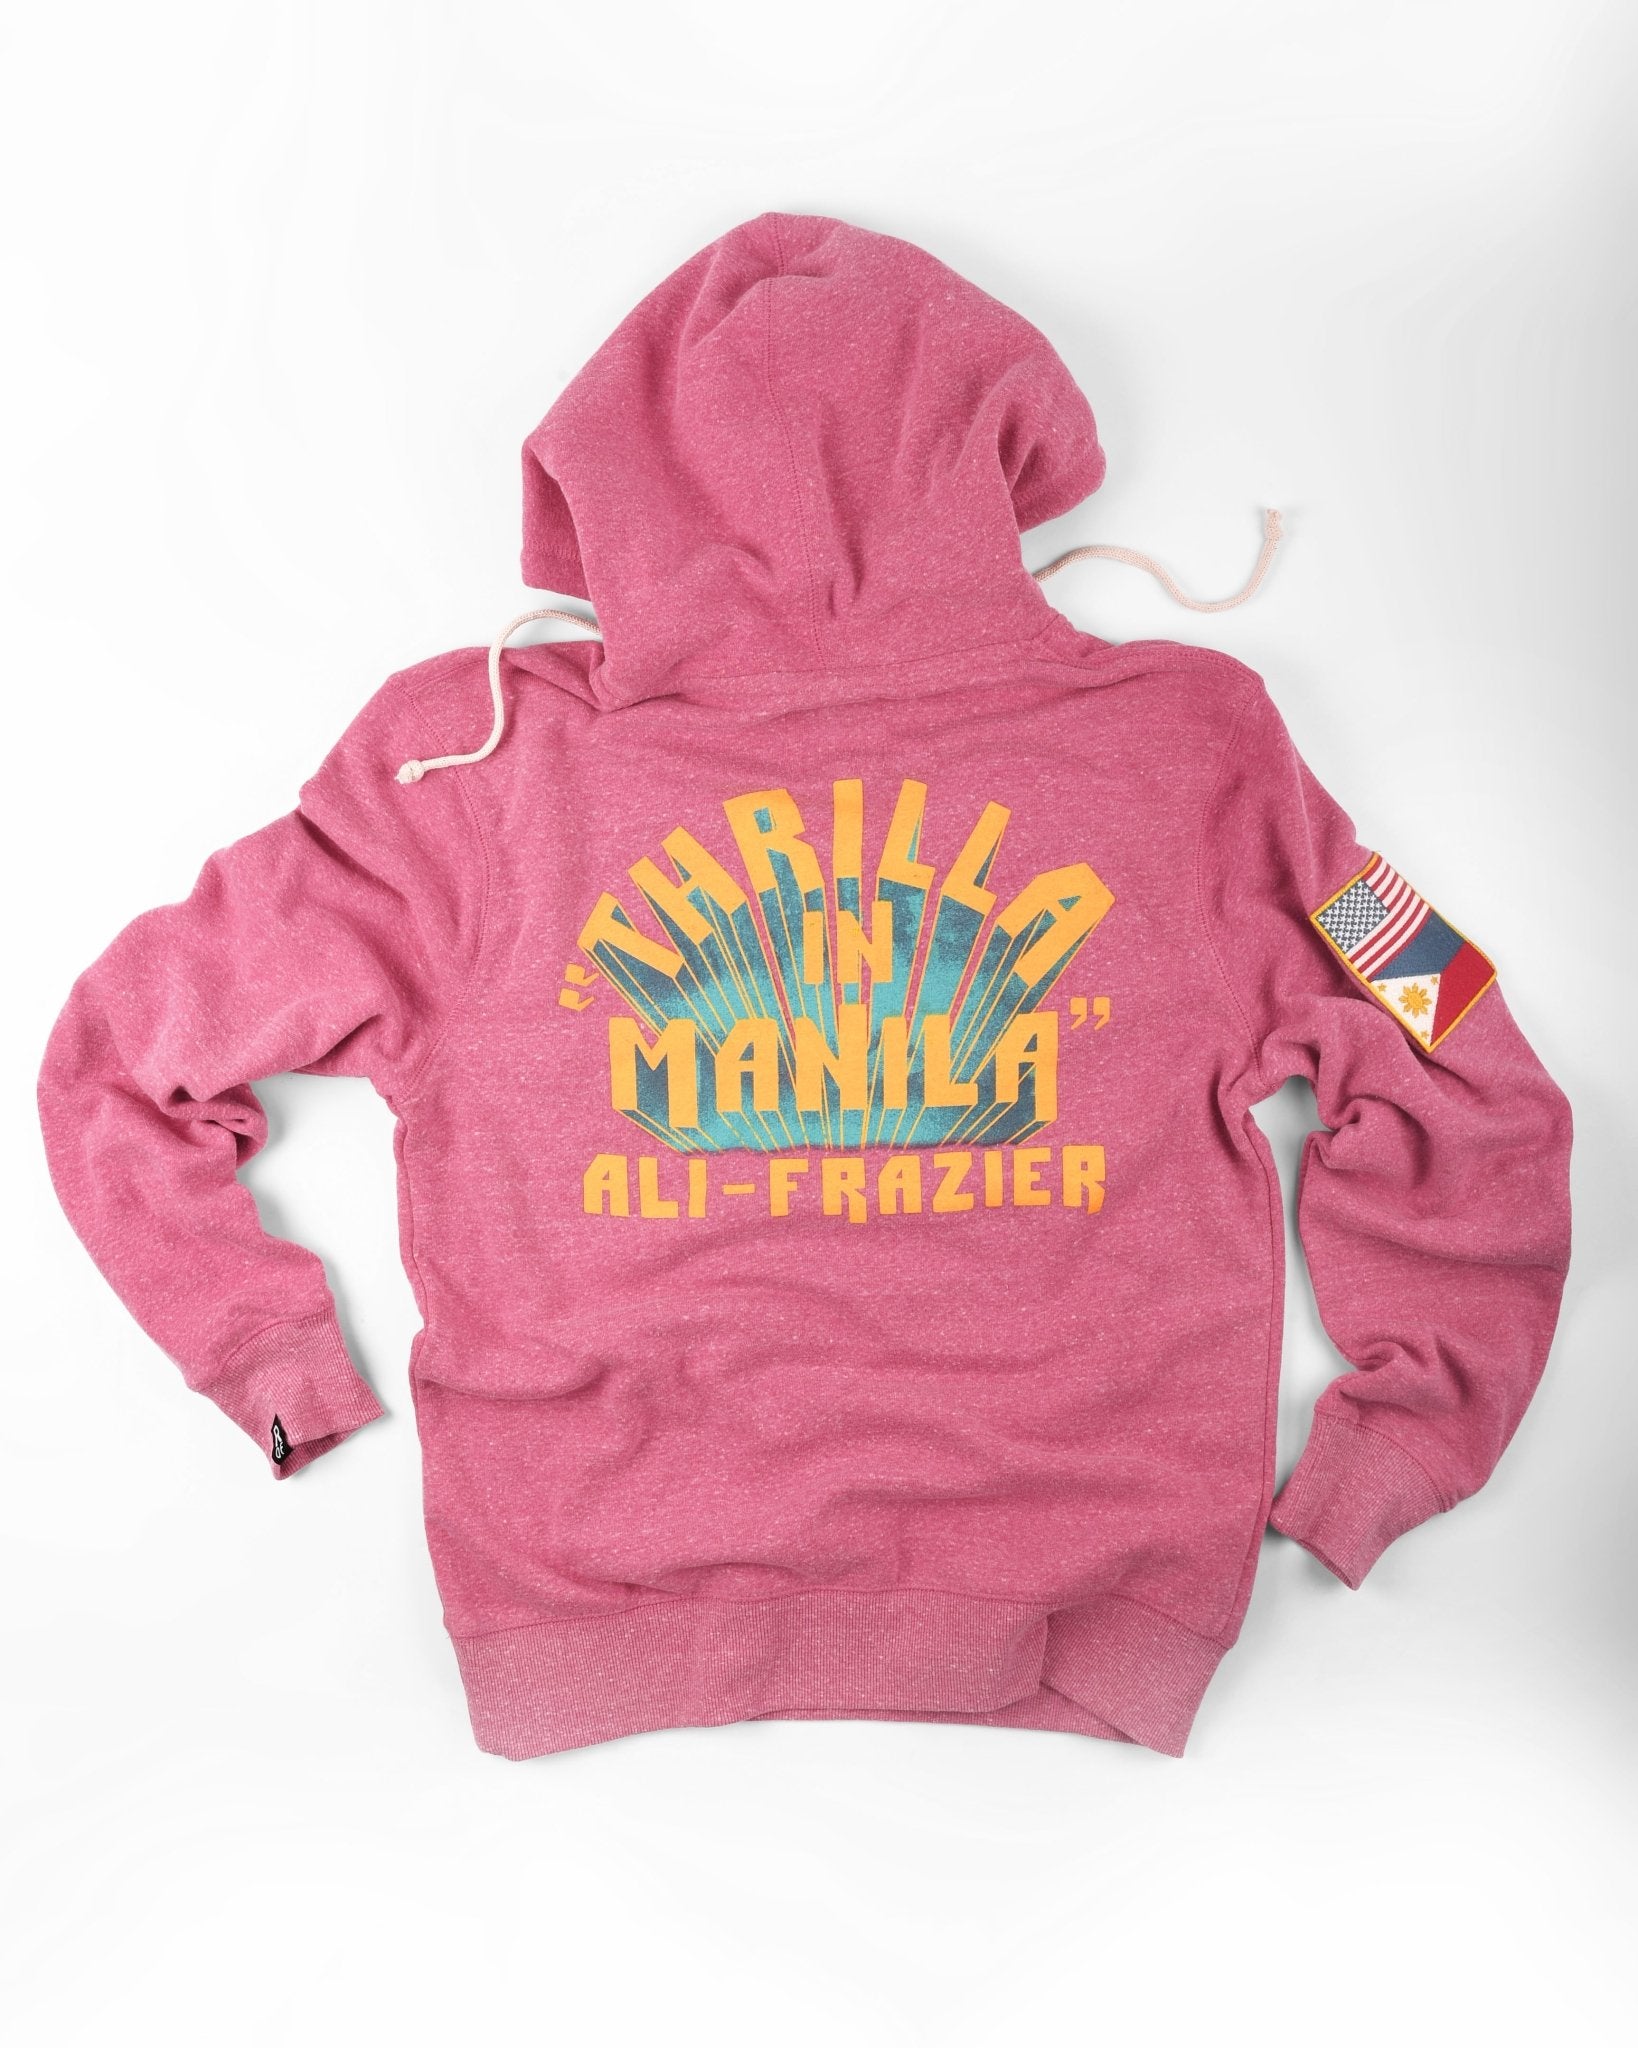 Thrilla in Manila Pink PO Hoody - Roots of Fight Canada